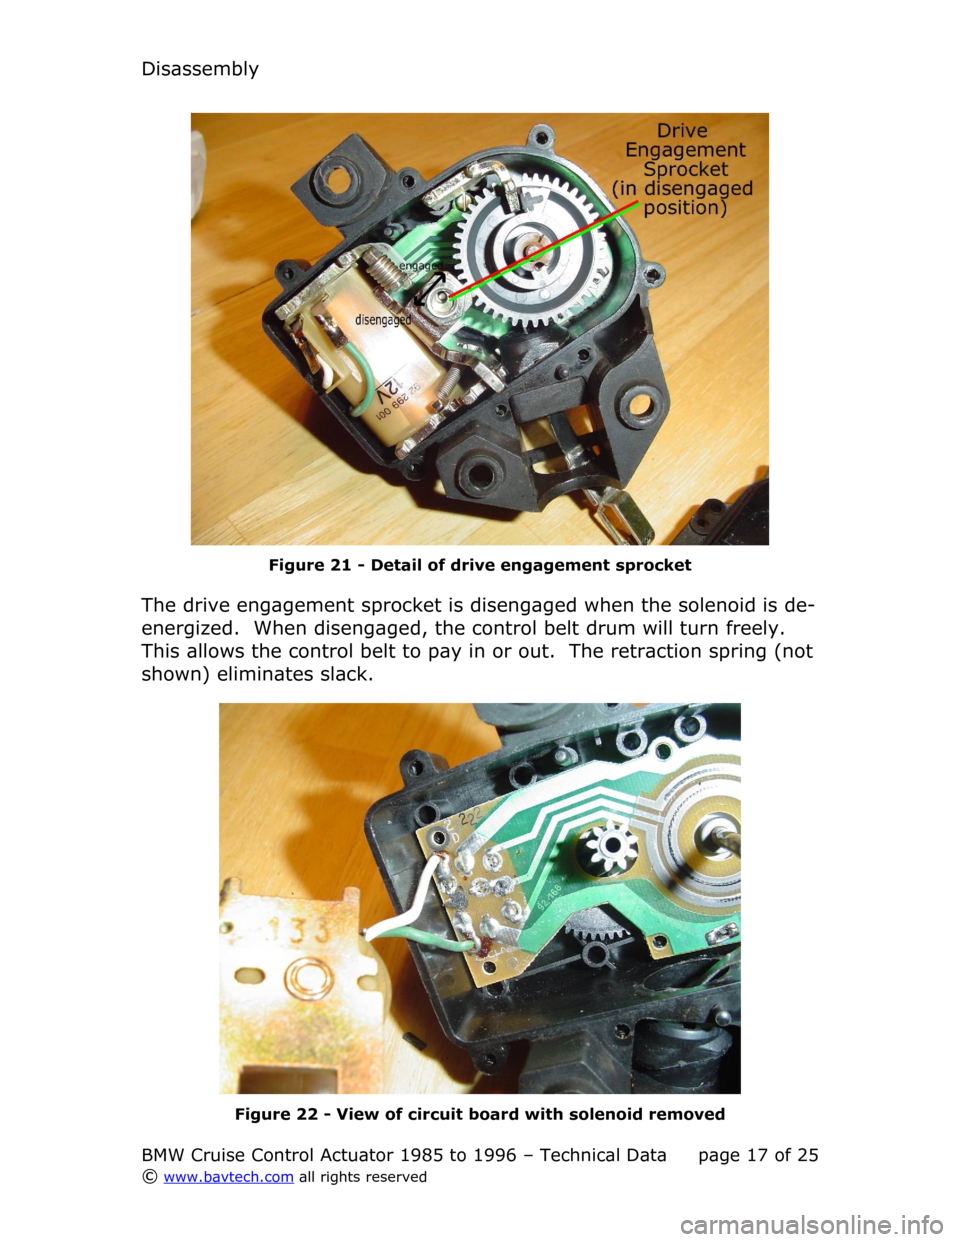 BMW 5 SERIES 1995 E34 Cruise Control Acutator Disassembly
Figure  21  - Detail of drive engagement sprocket
The drive engagement sprocket is disengaged when the solenoid is de-
energized.  When disengaged, the control belt drum will turn freely. 